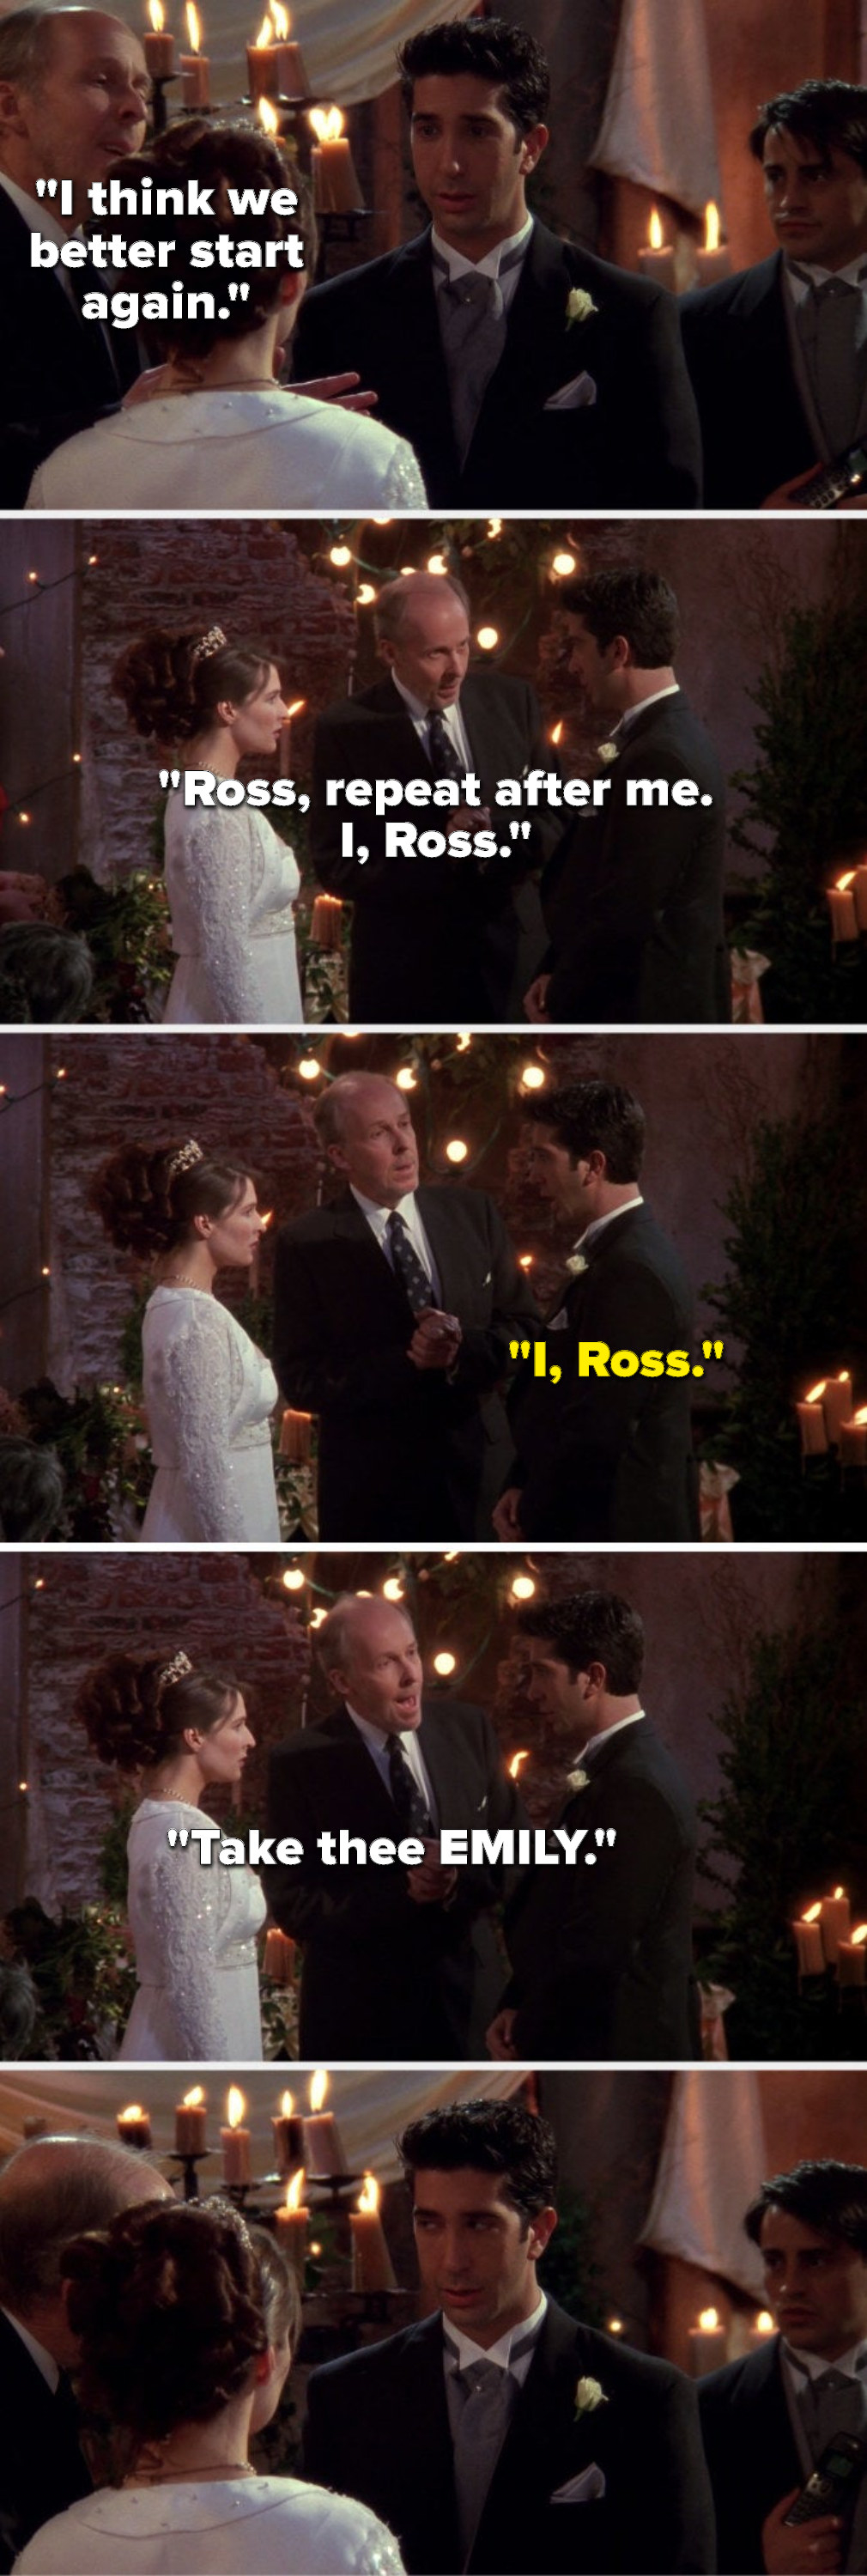 The officiant says, I think we better start again, Ross, repeat after me, I, Ross, Ross says, I, Ross, and the officiant says Take thee EMILY